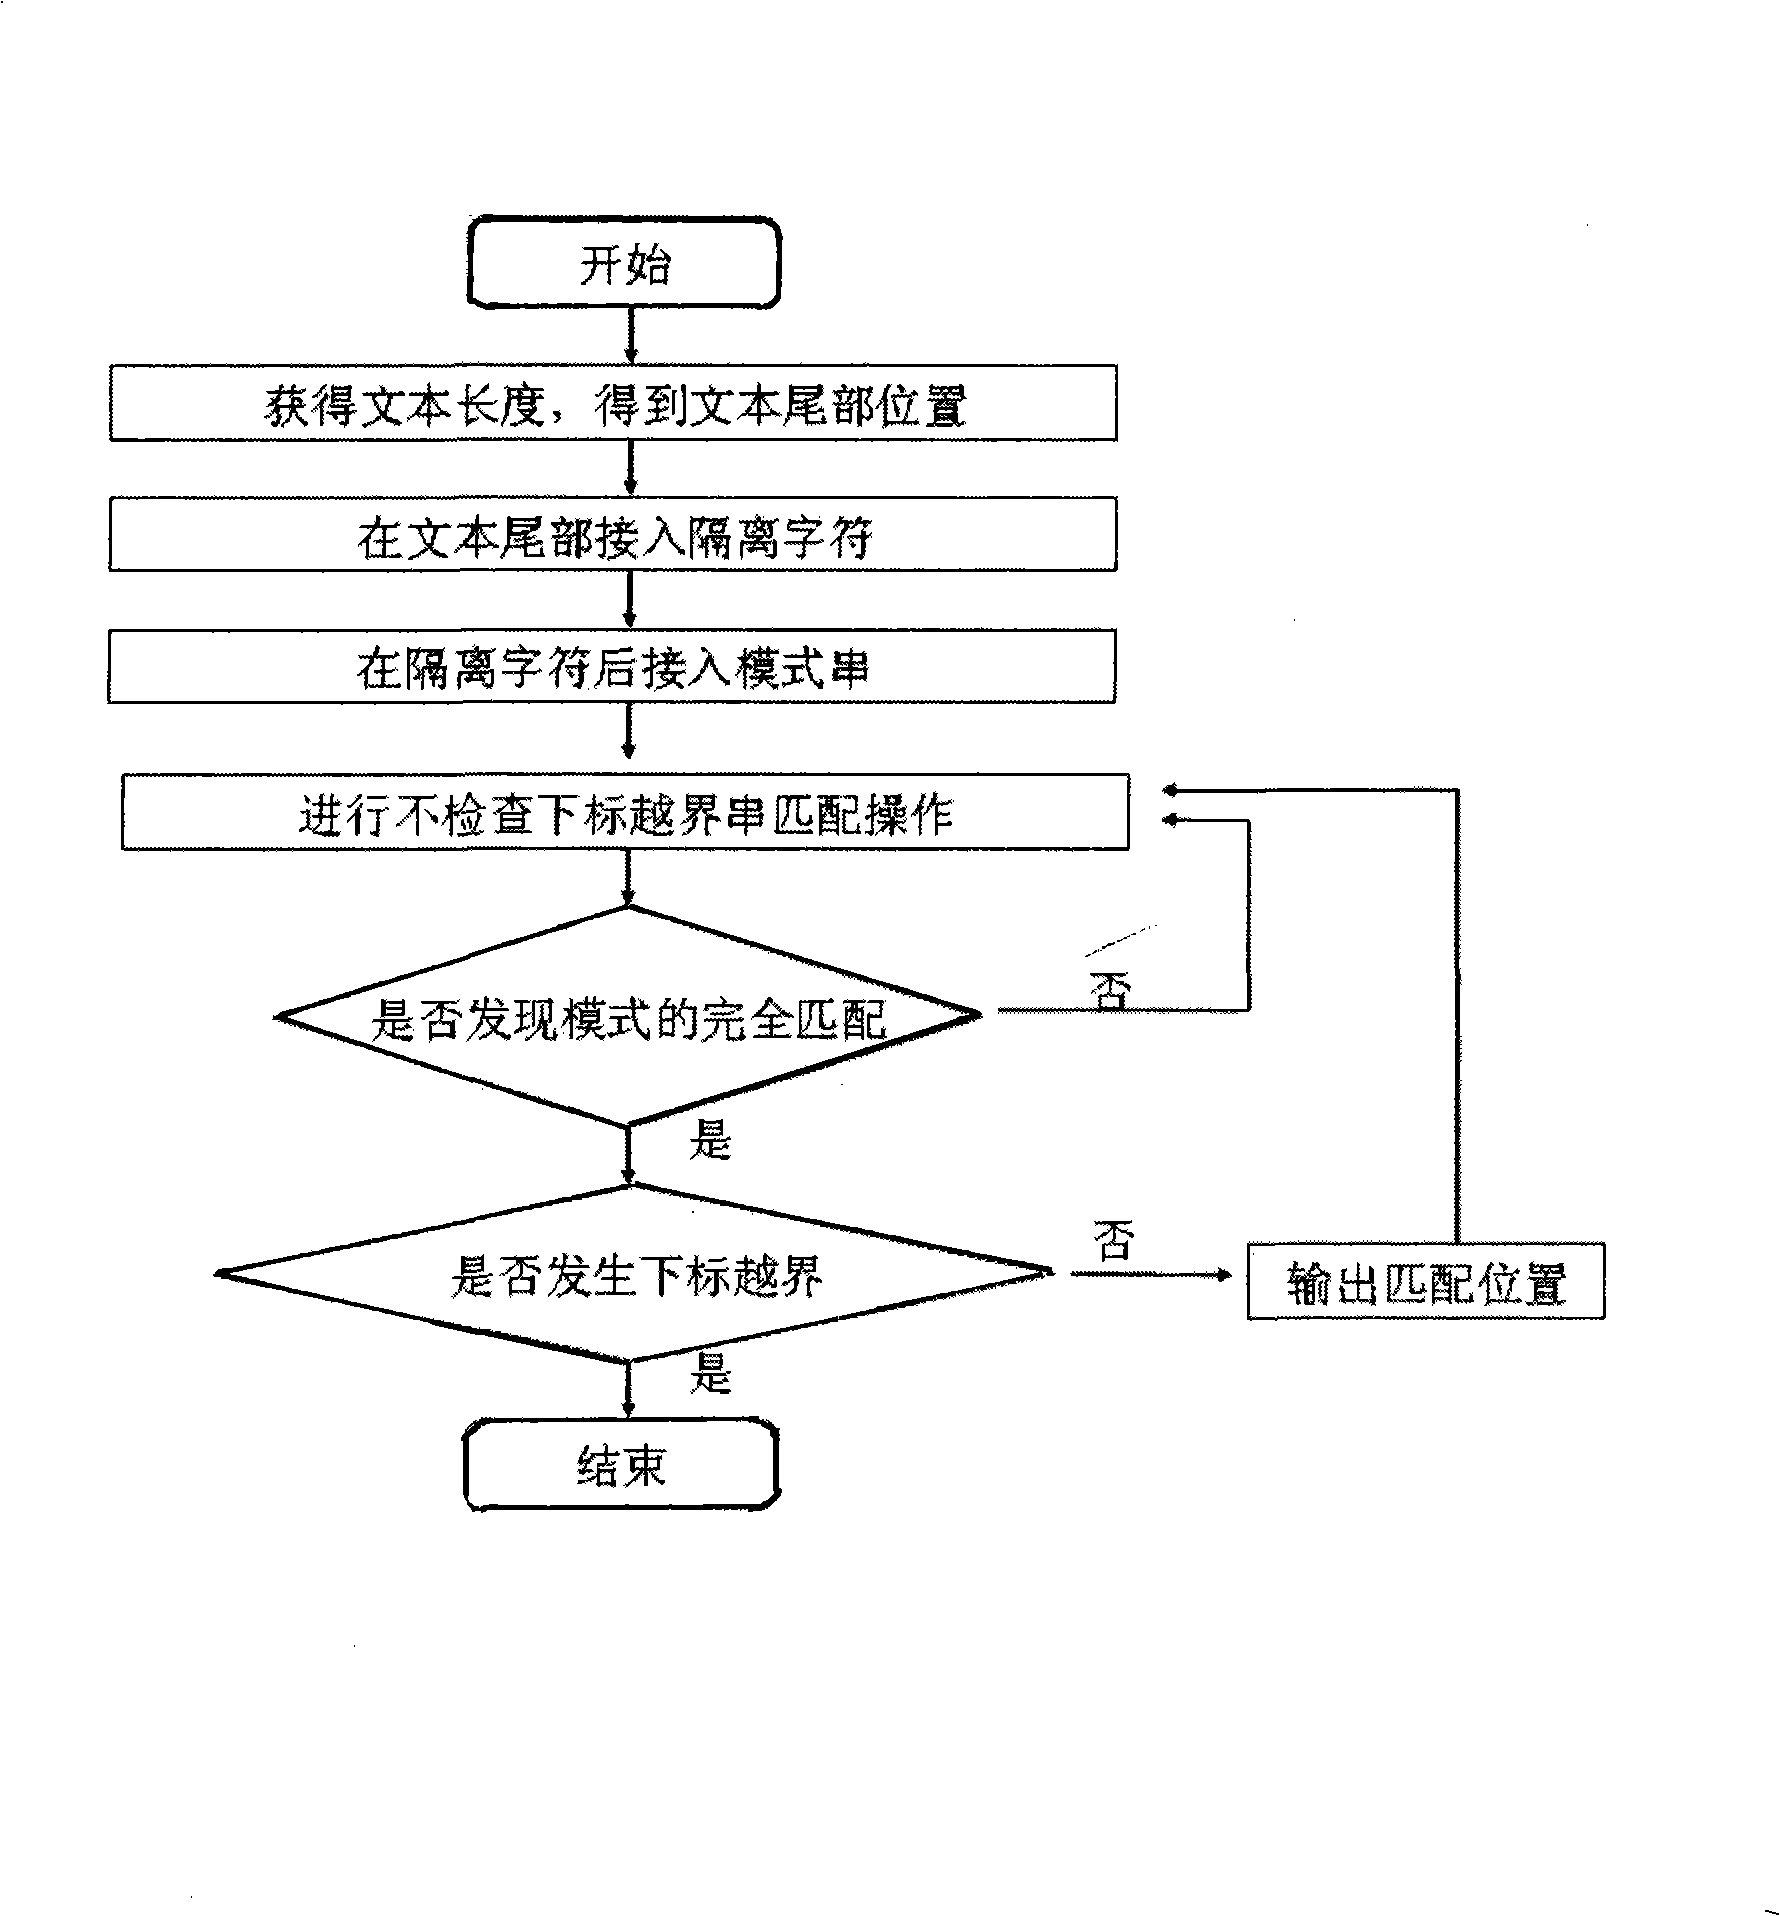 Method for accelerating character string matching by trans-border protection mechanism